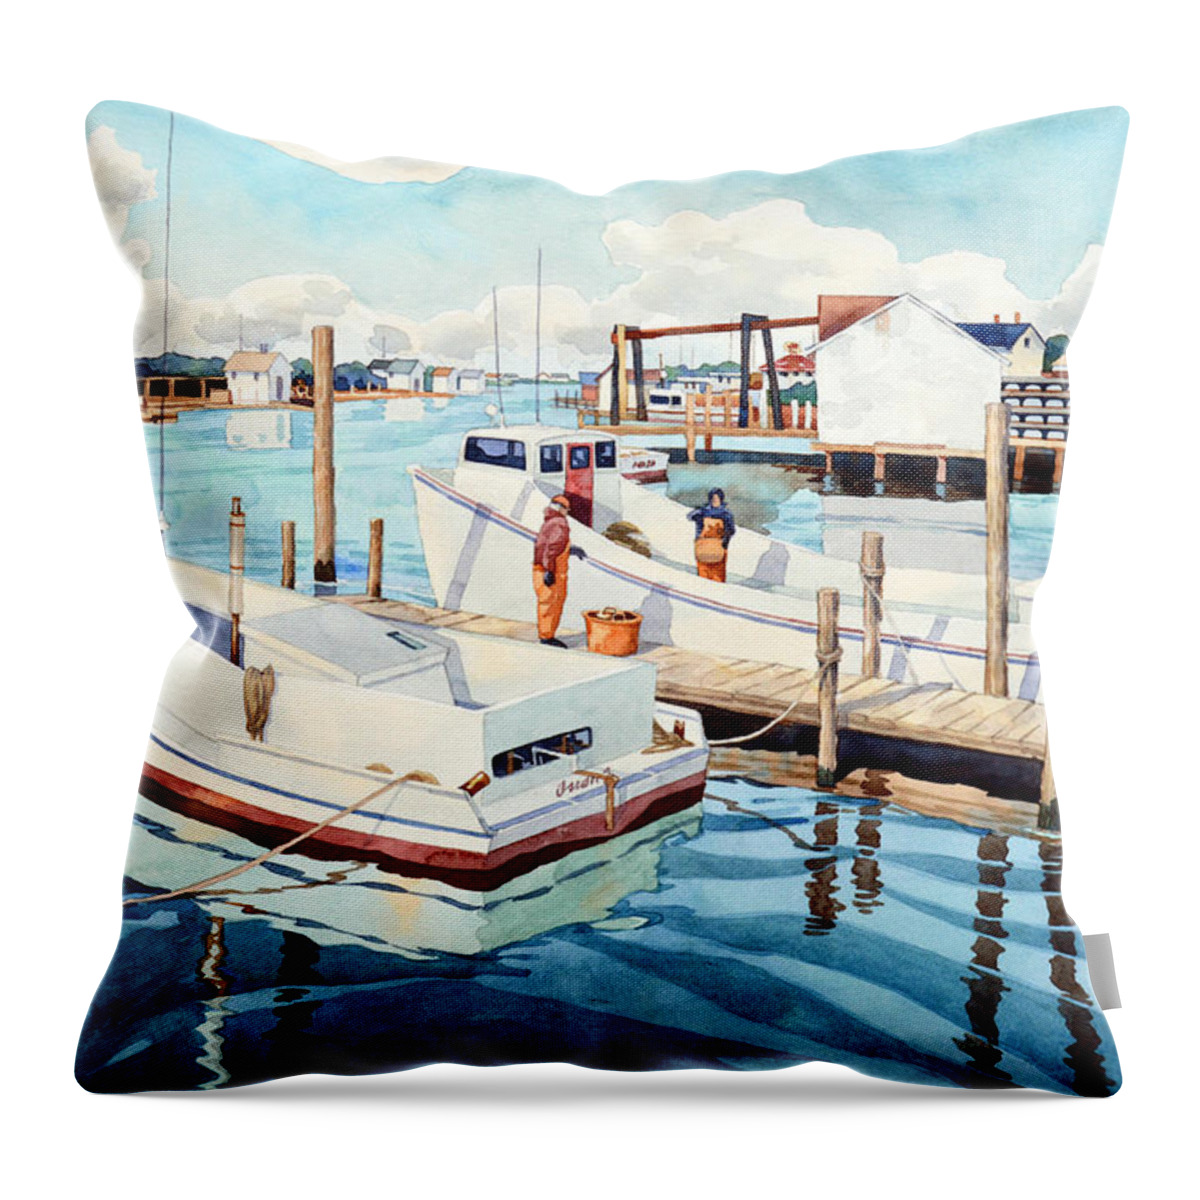 Watercolor Throw Pillow featuring the painting Watermen by Mick Williams